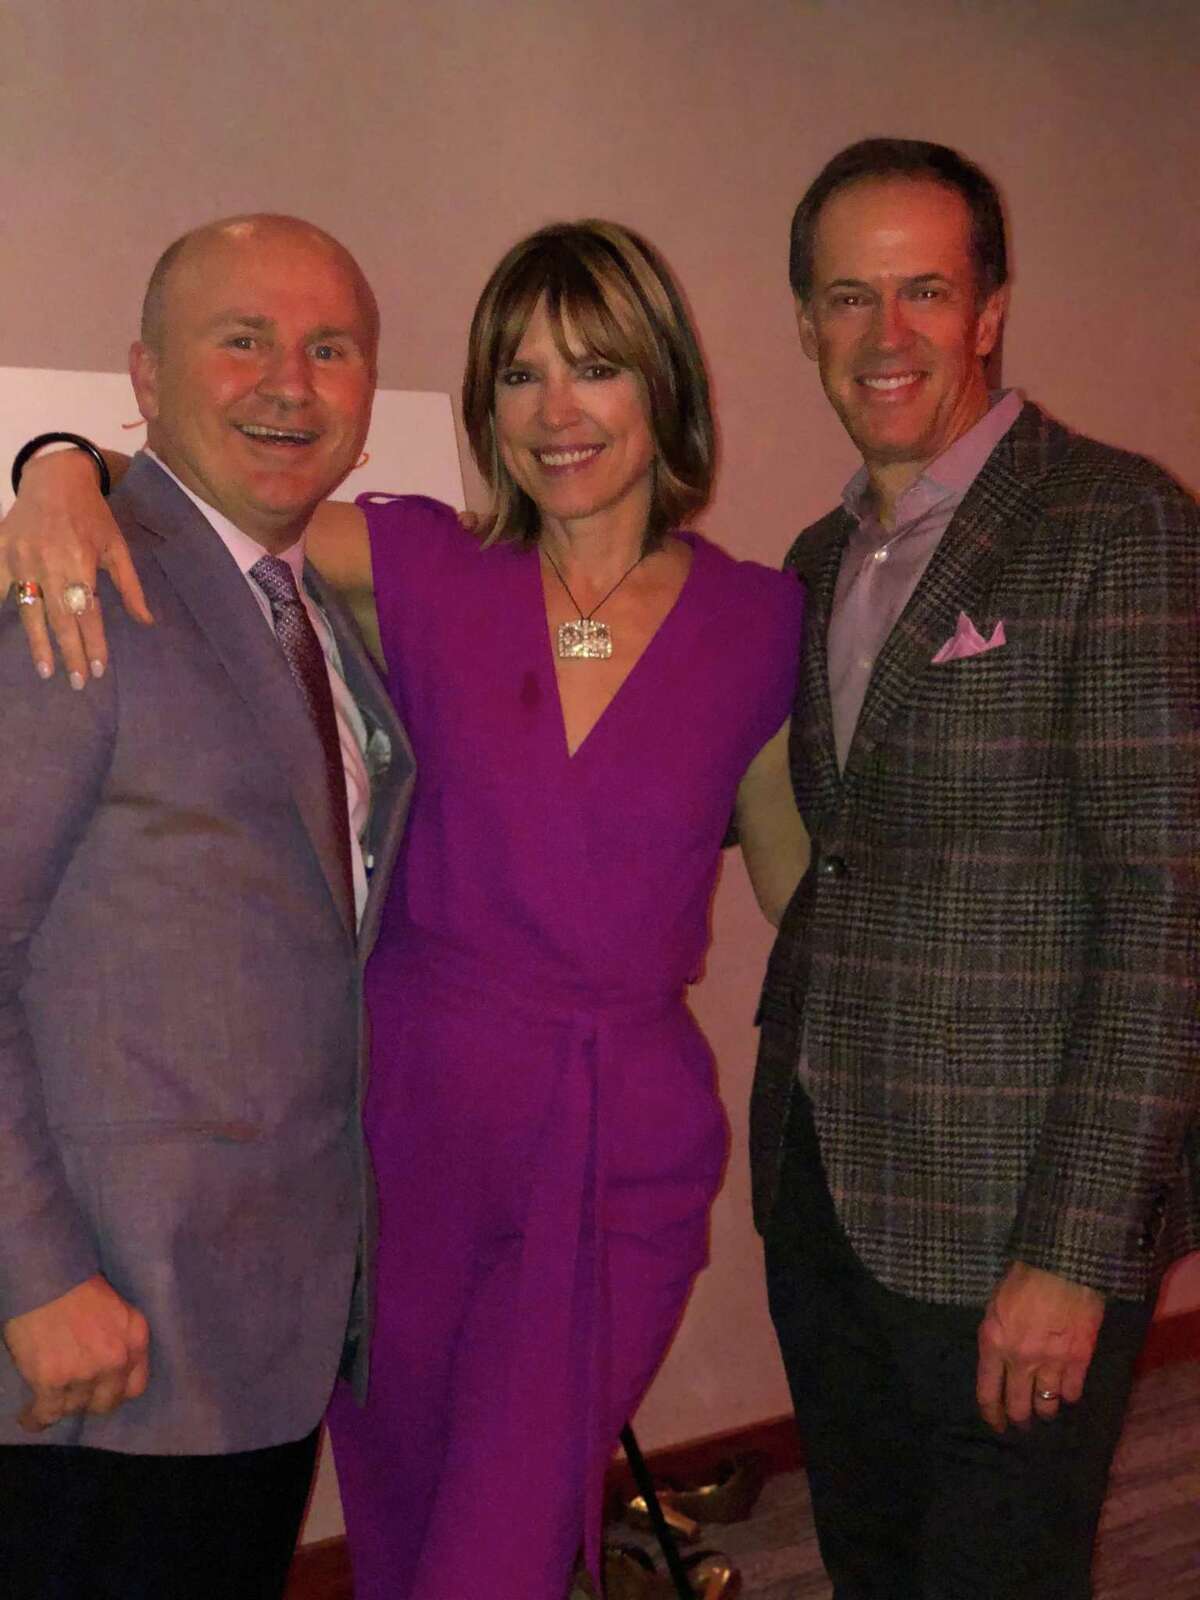 Greenwich residents and sports anchors Hannah Storm and Dan Hicks, right, at JHouse with Tony Capasso of Tony’s. | File photo